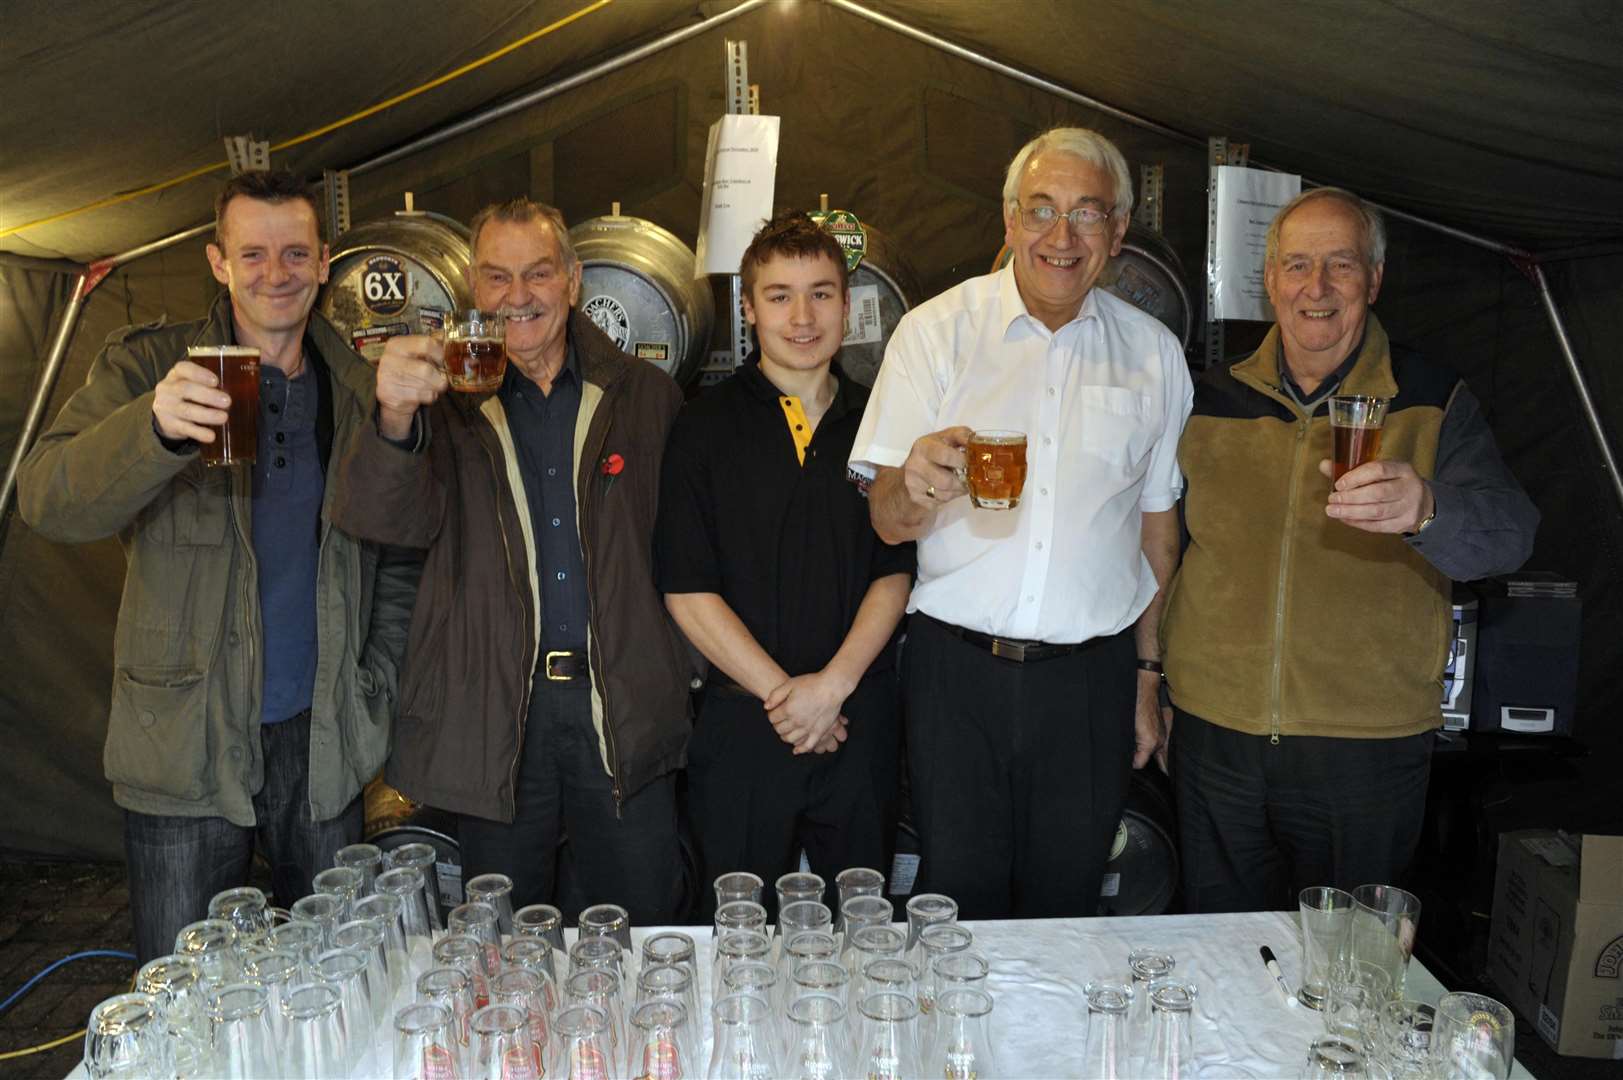 Beer festival at the Chequers in 2010